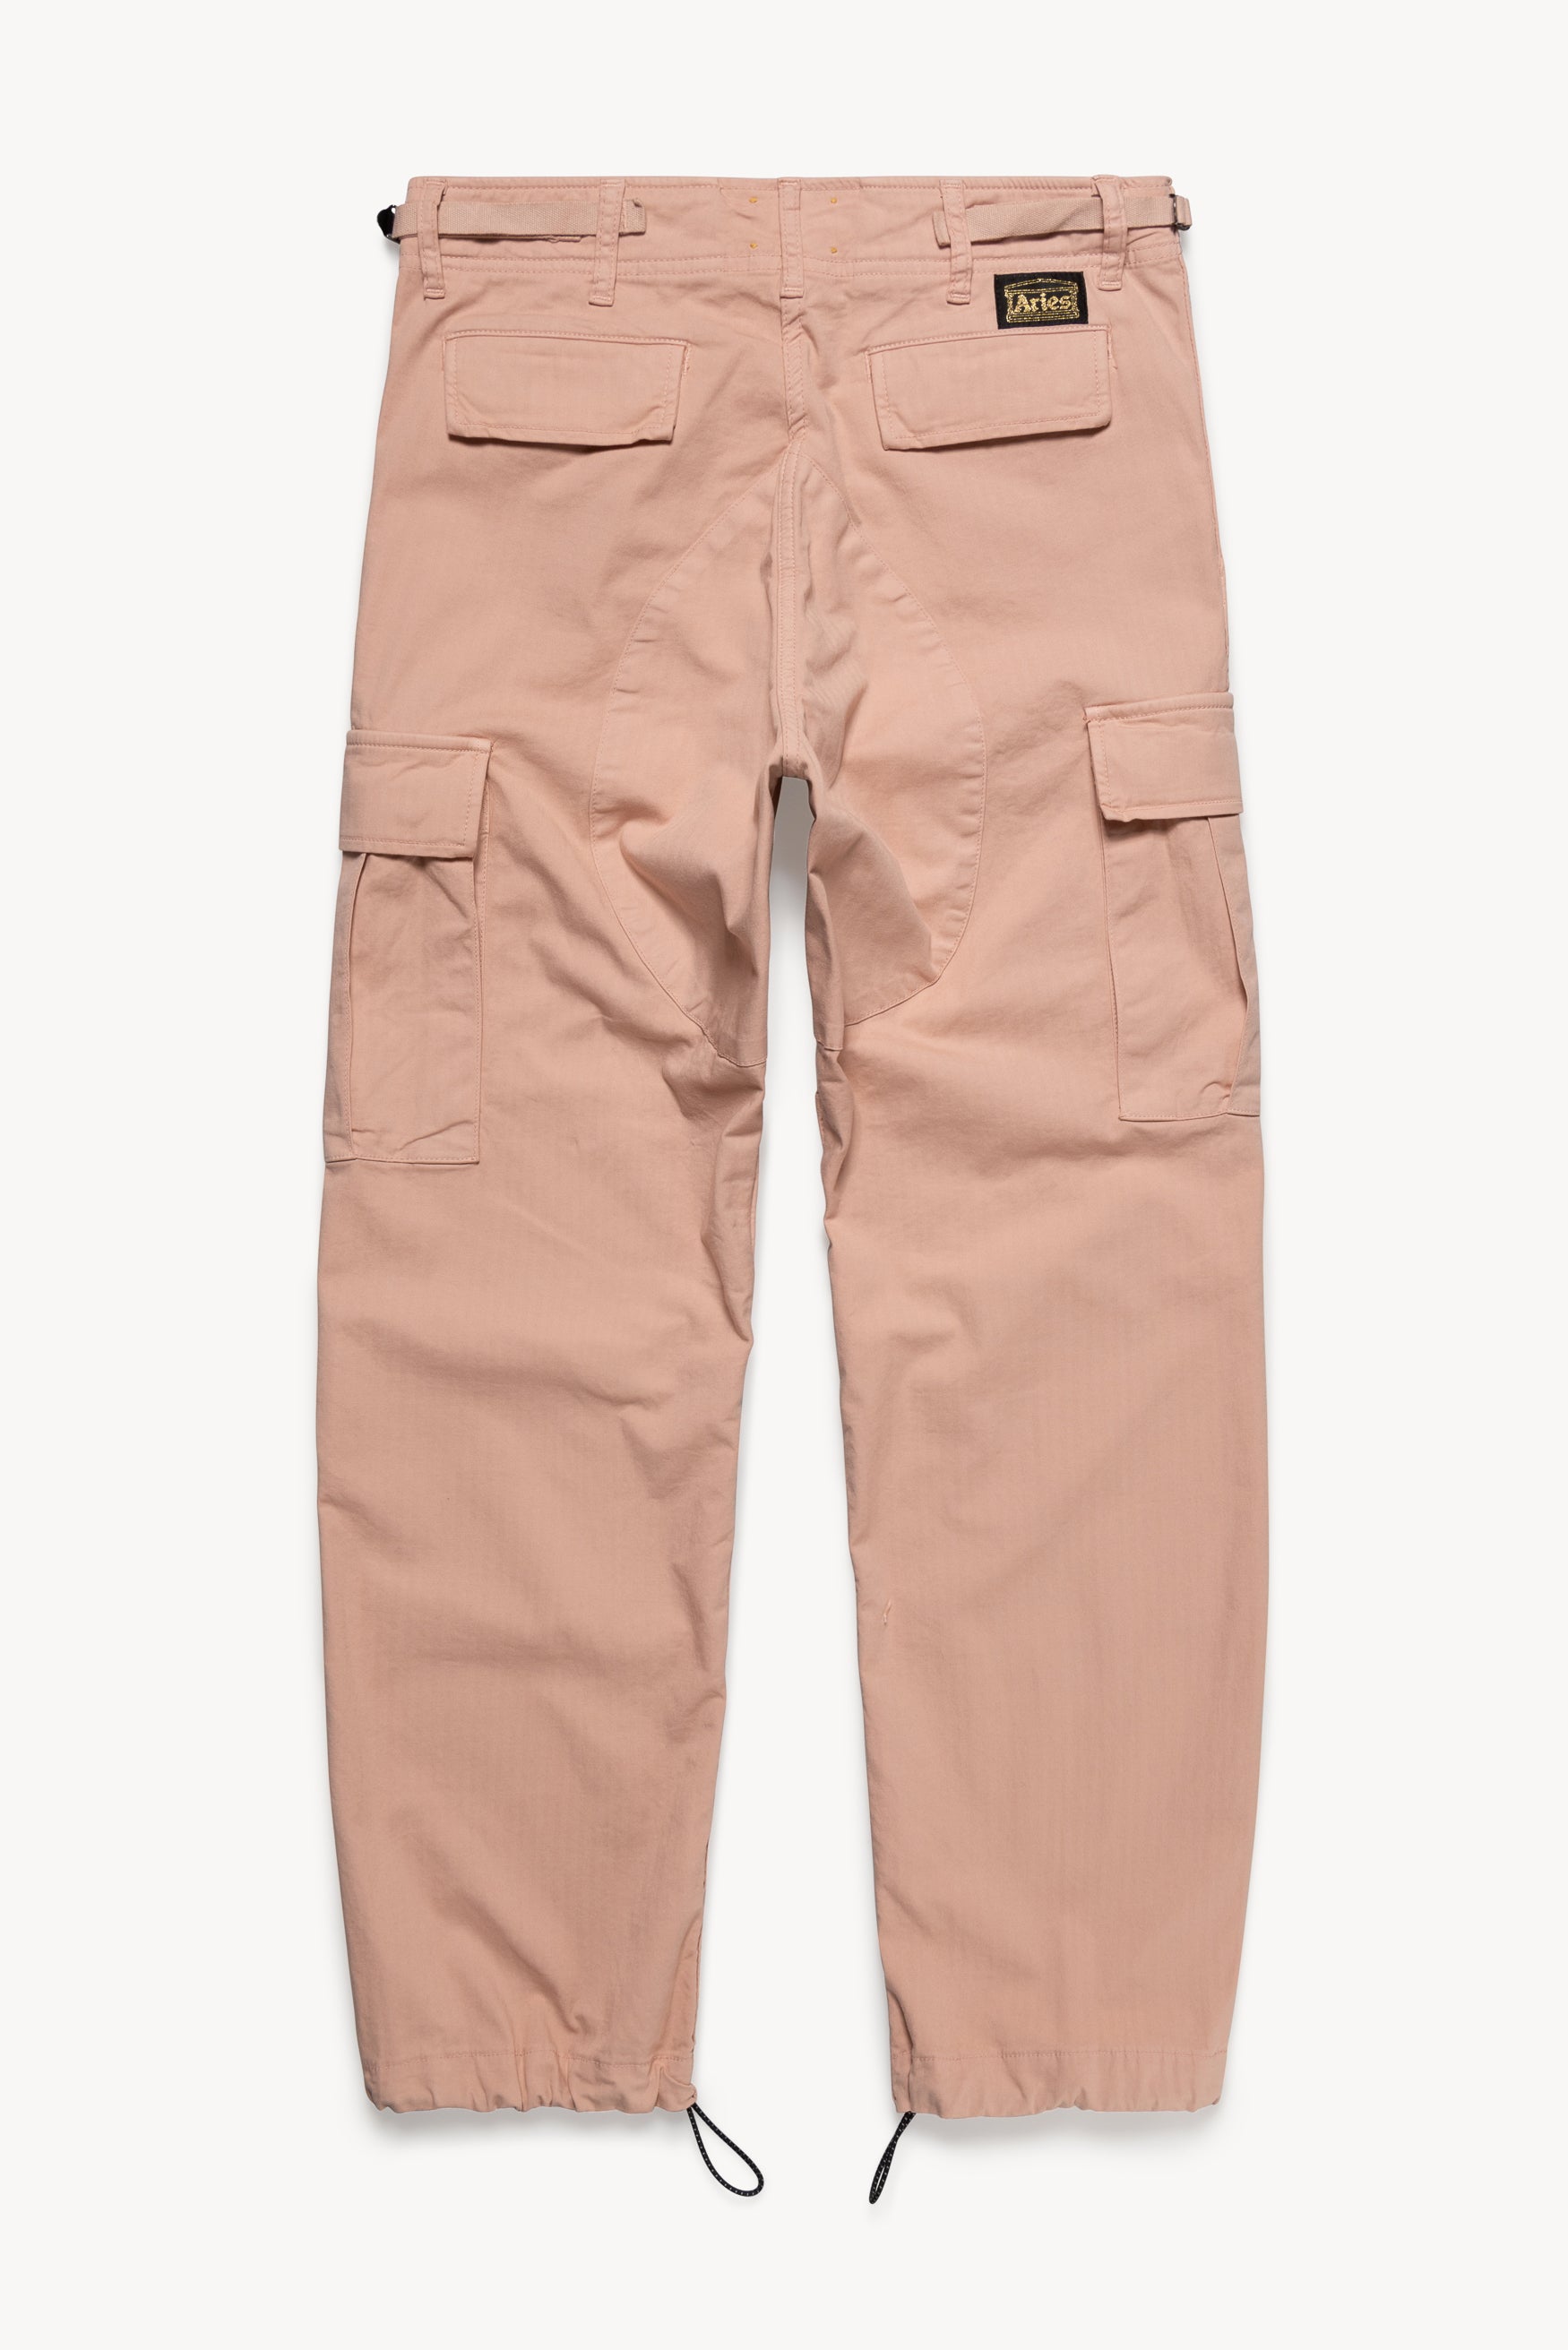 Load image into Gallery viewer, Cargo Pants